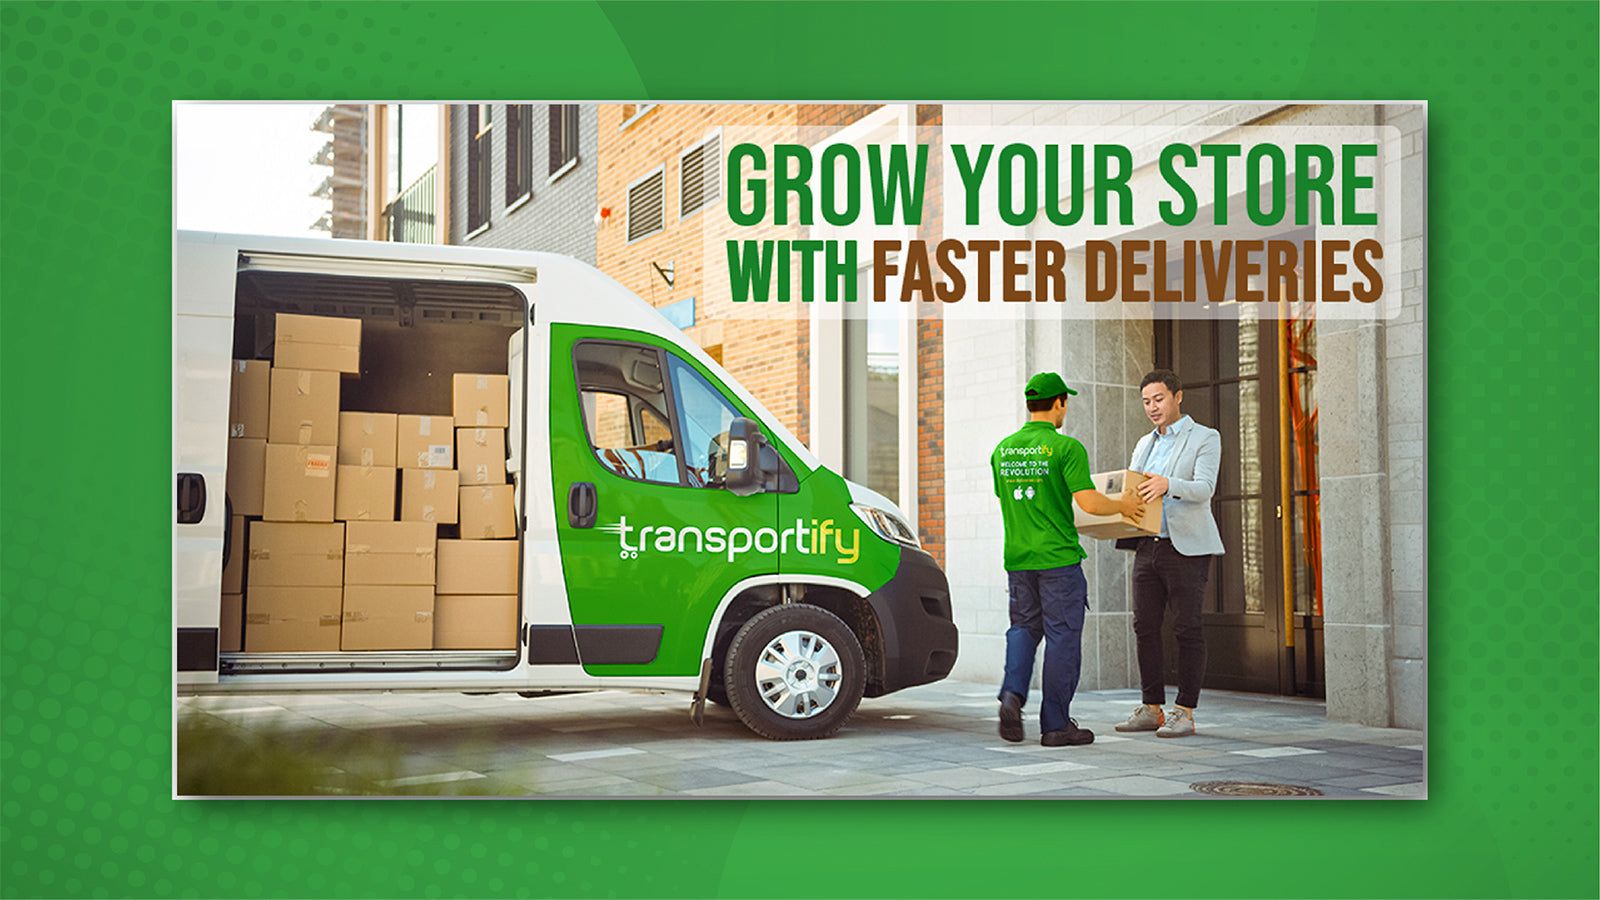 Grow your store with faster deliveries